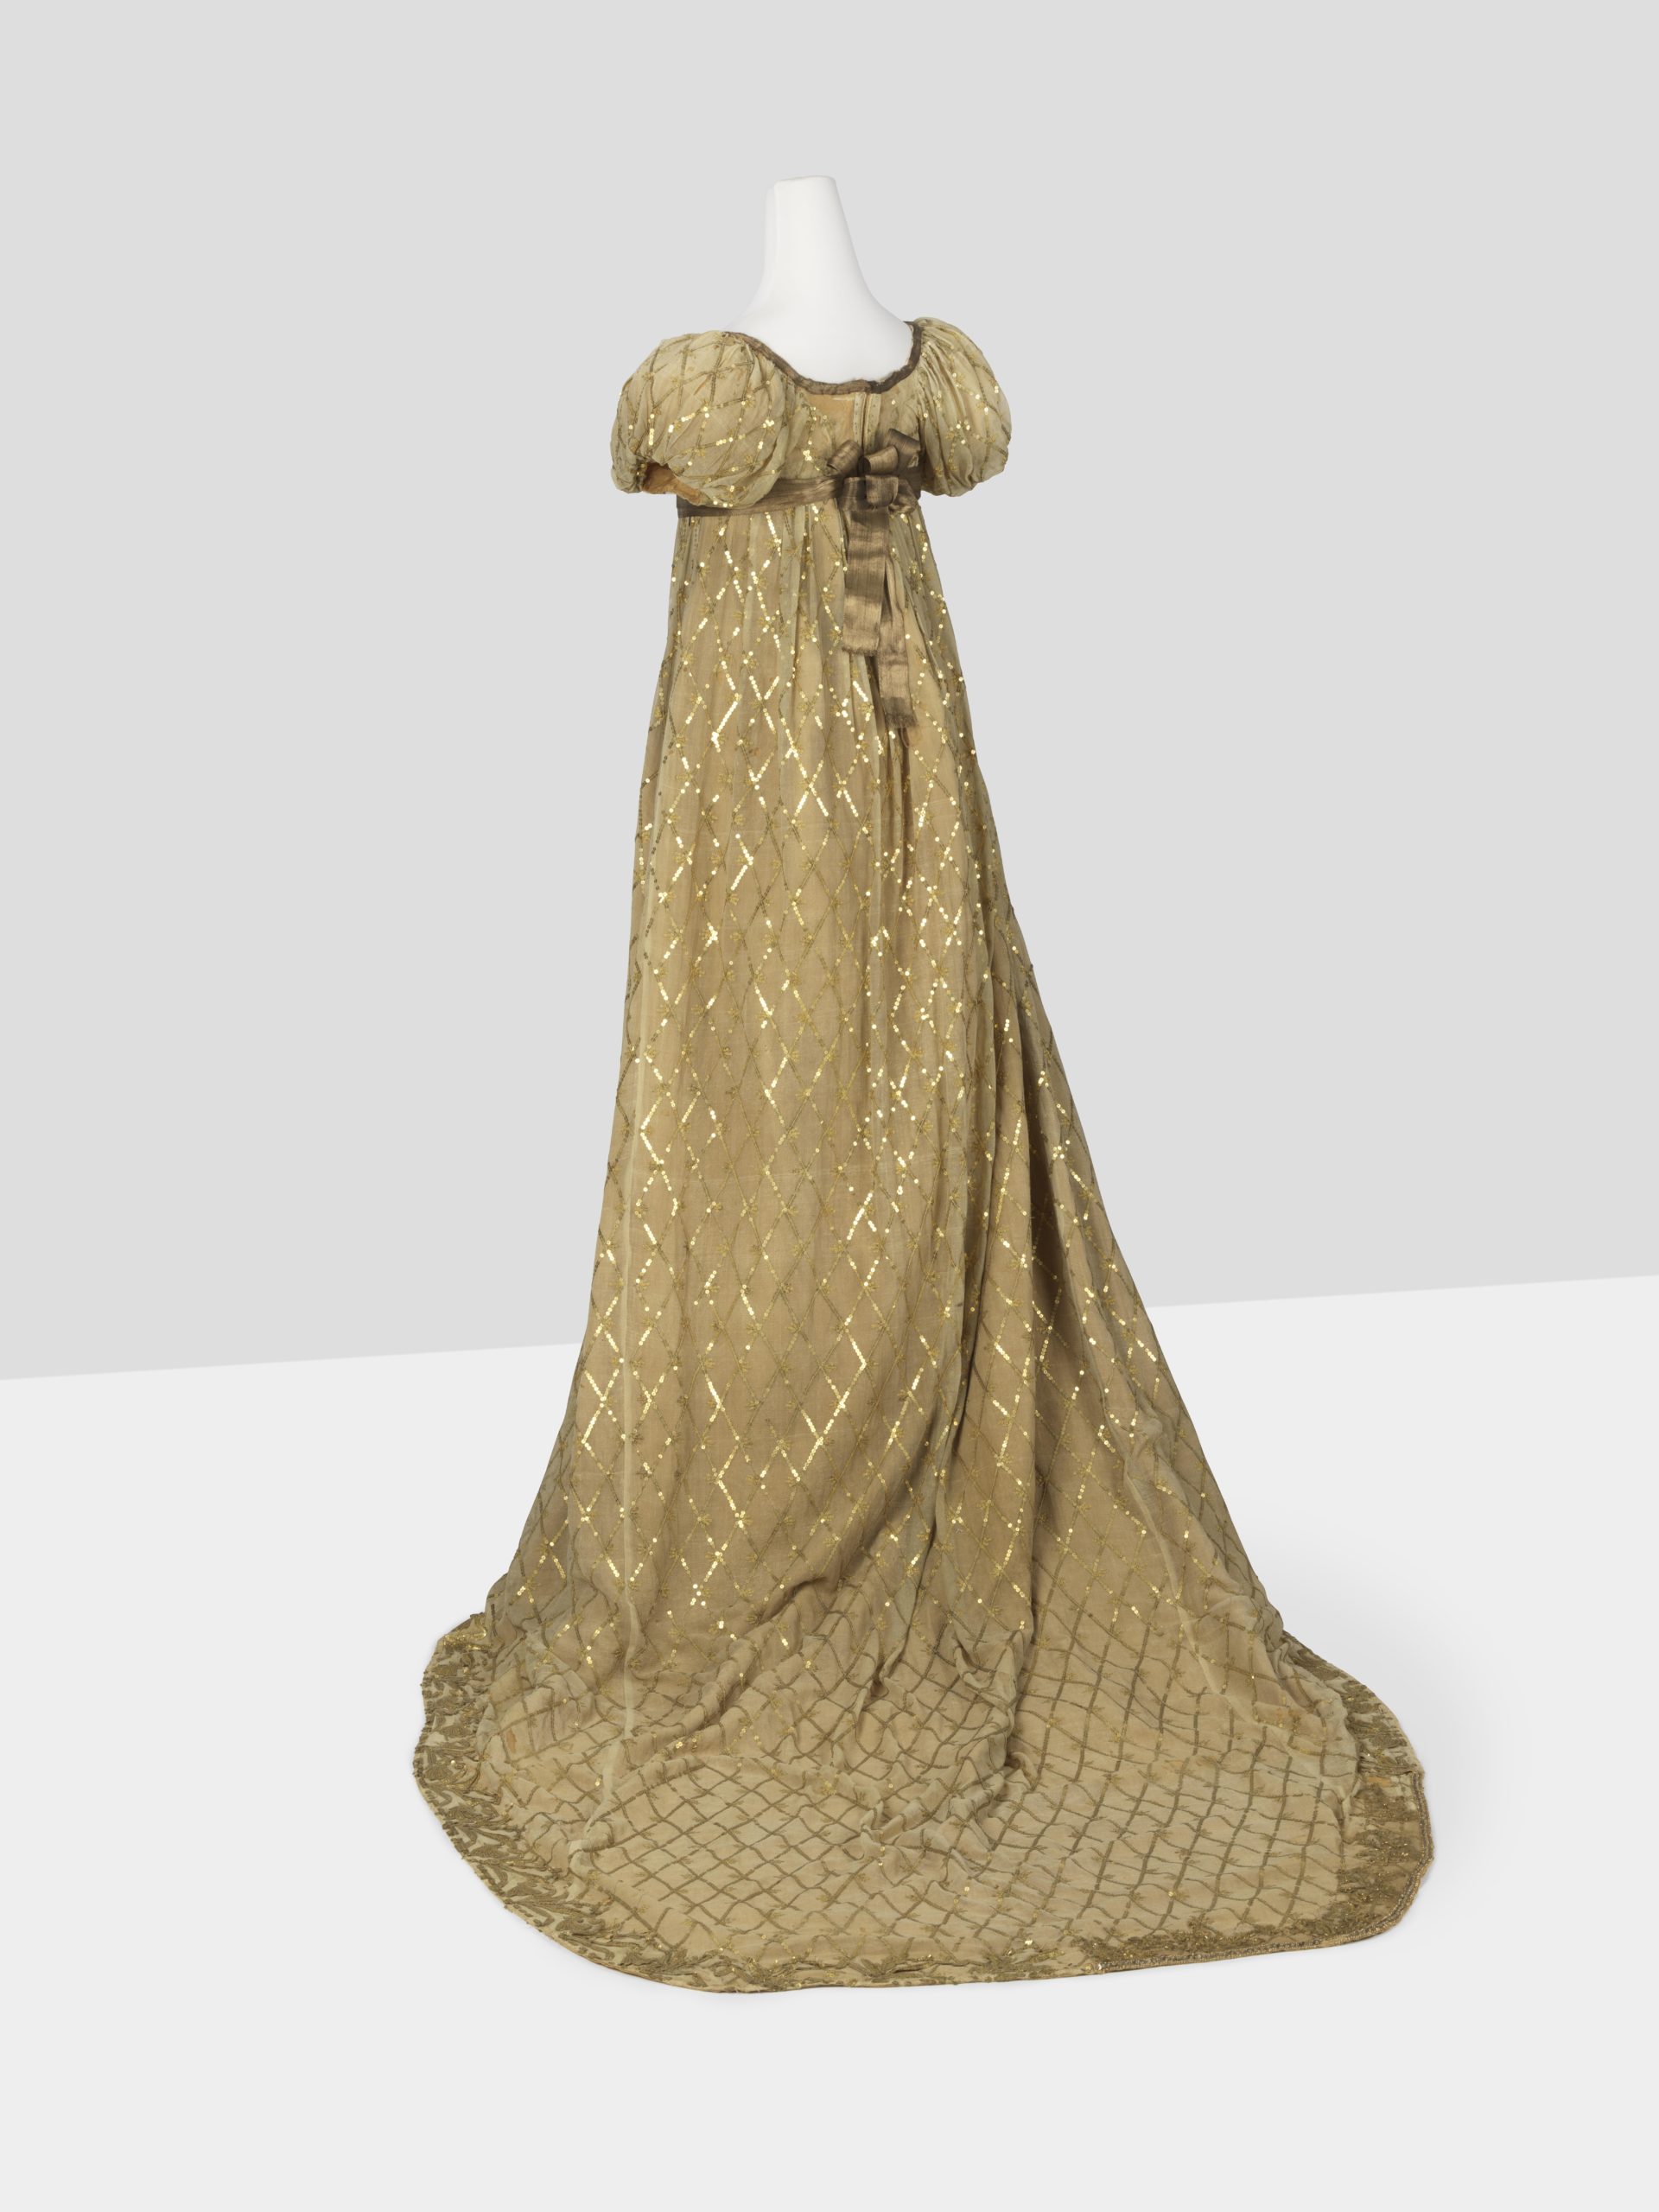 Evening dress, 1807 - 1810, crÃªpe georgette, sequins, metal, whalebone; cloth of gold with embroidery, Object Number 4477, donation 1924, centraalmuseum.nl